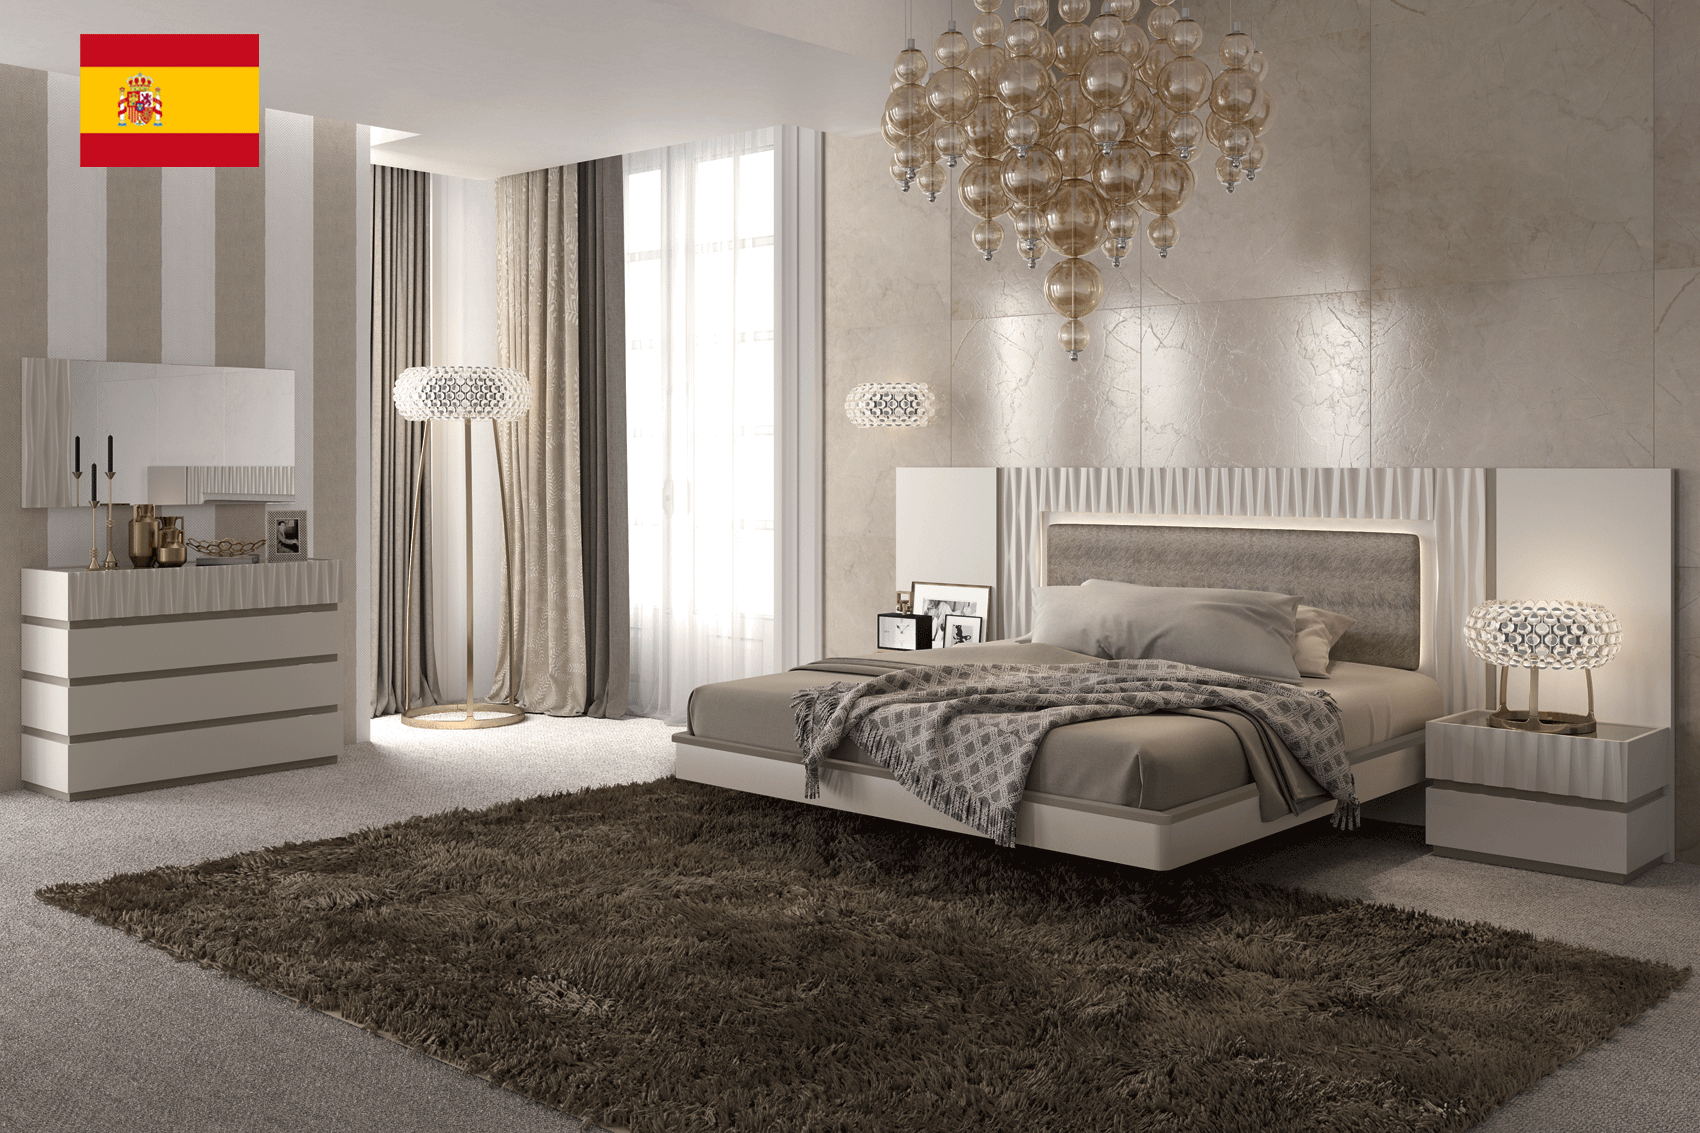 Bedroom Furniture Dressers and Chests Marina Taupe Bedroom